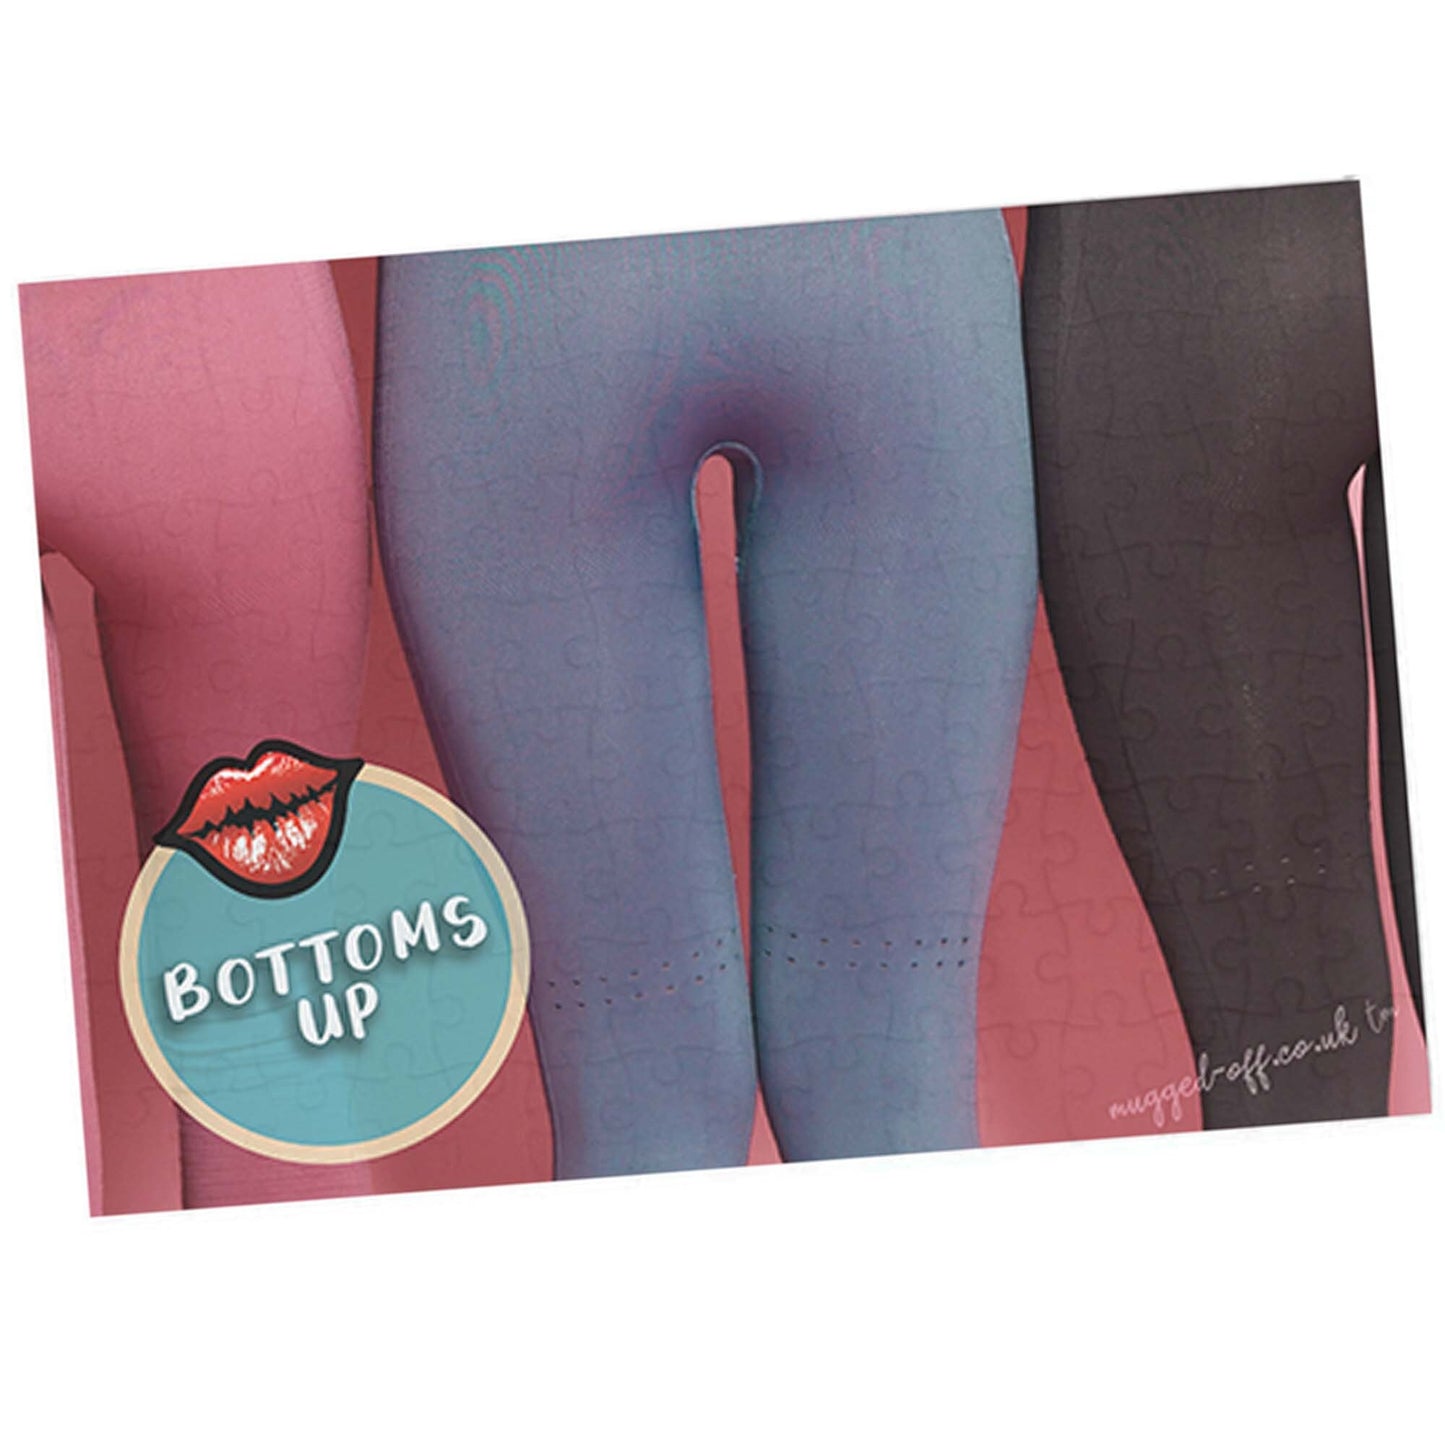 Bottoms up puzzle, sexy puzzle Jigsaw Puzzle A4 size Christmas gift present Birthday valentine day